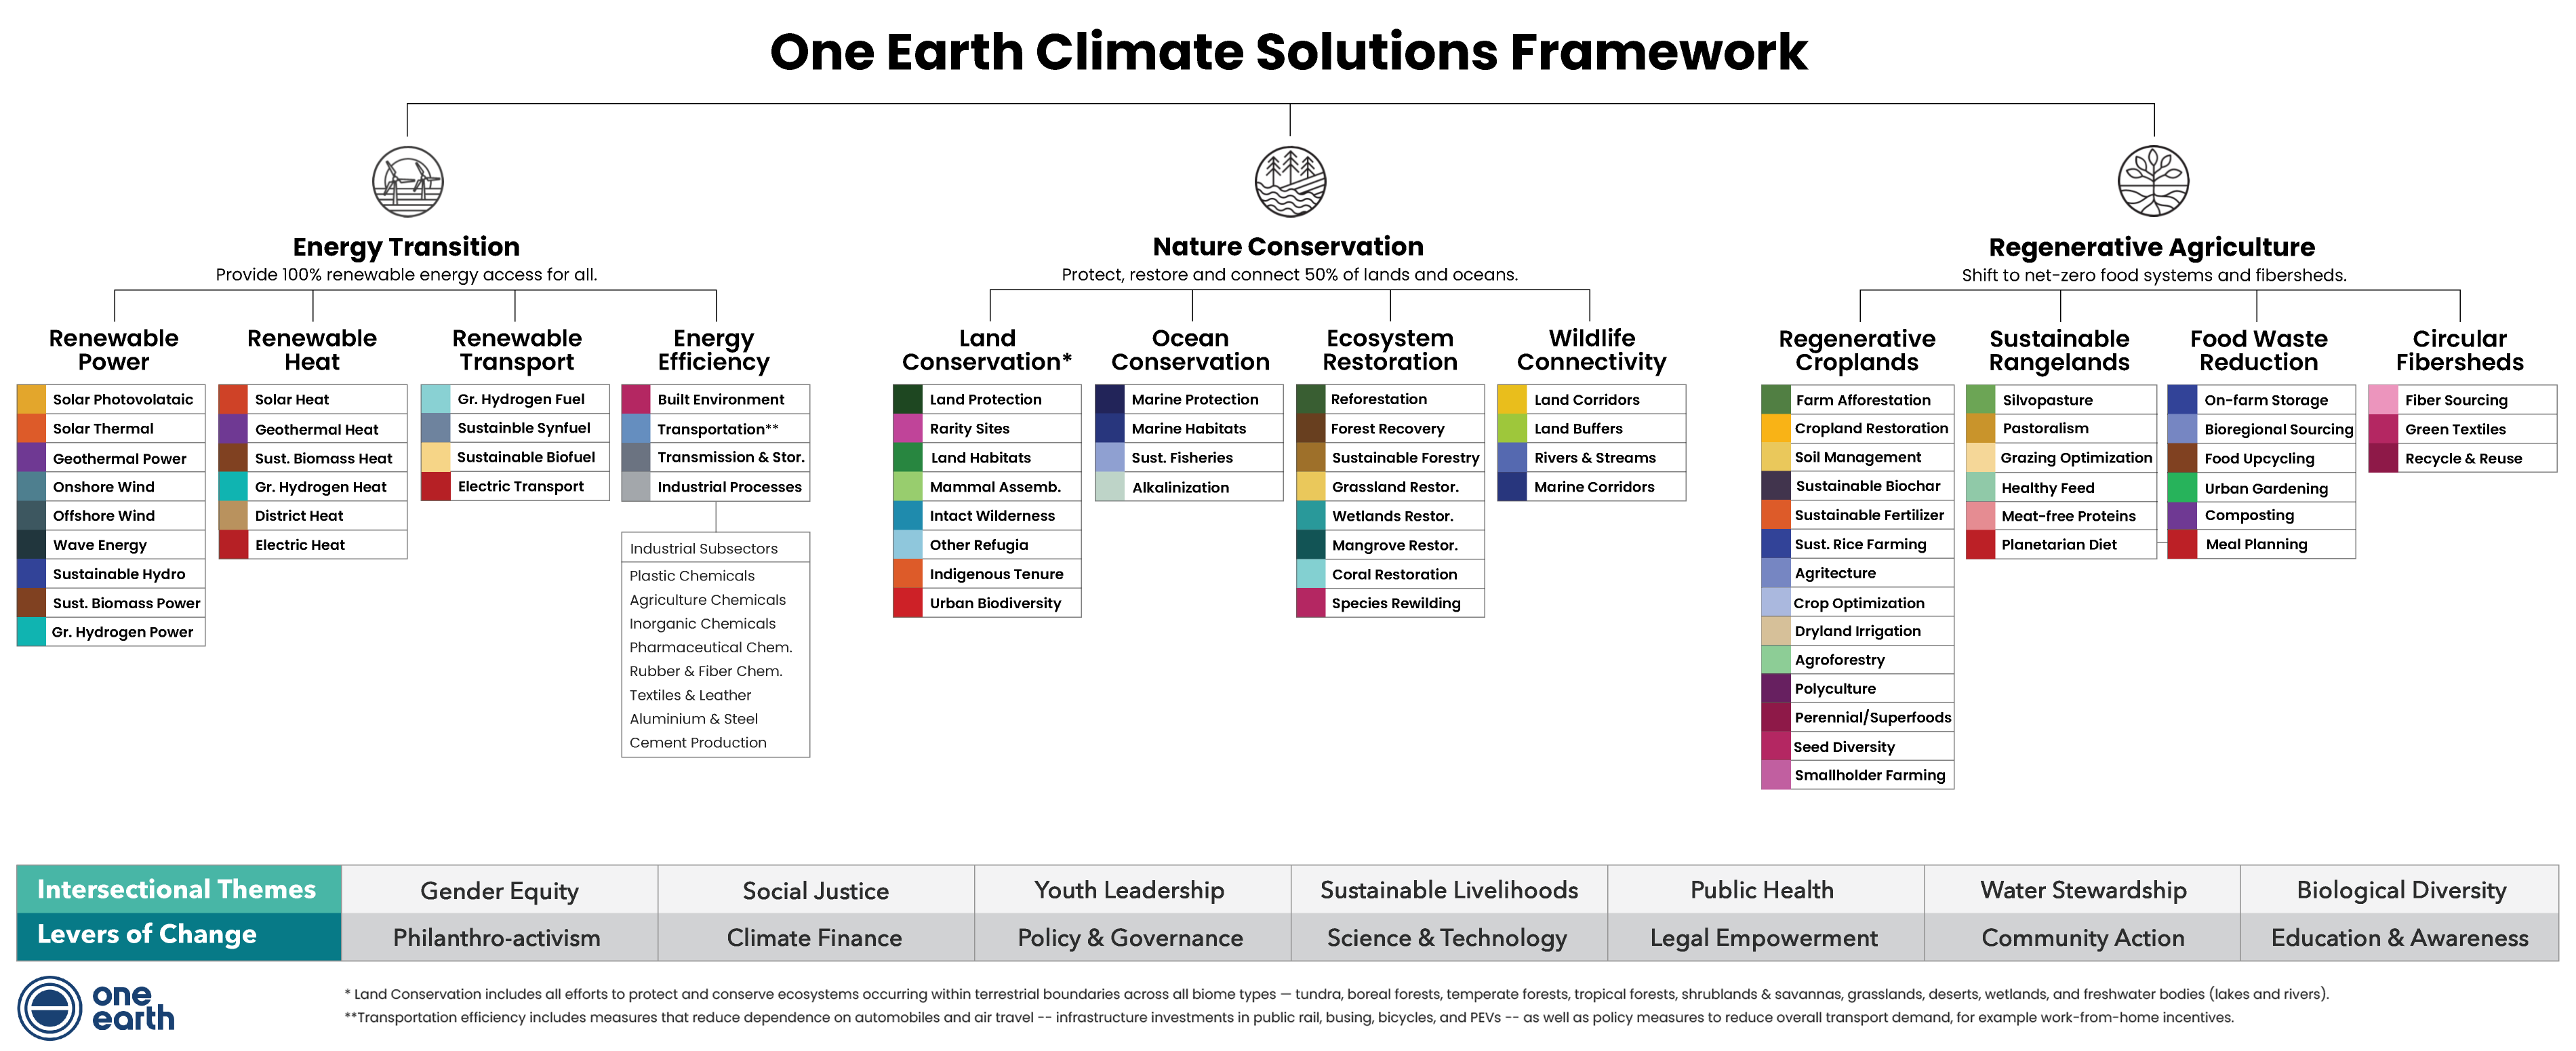 One Earth Climate Solutions Framework